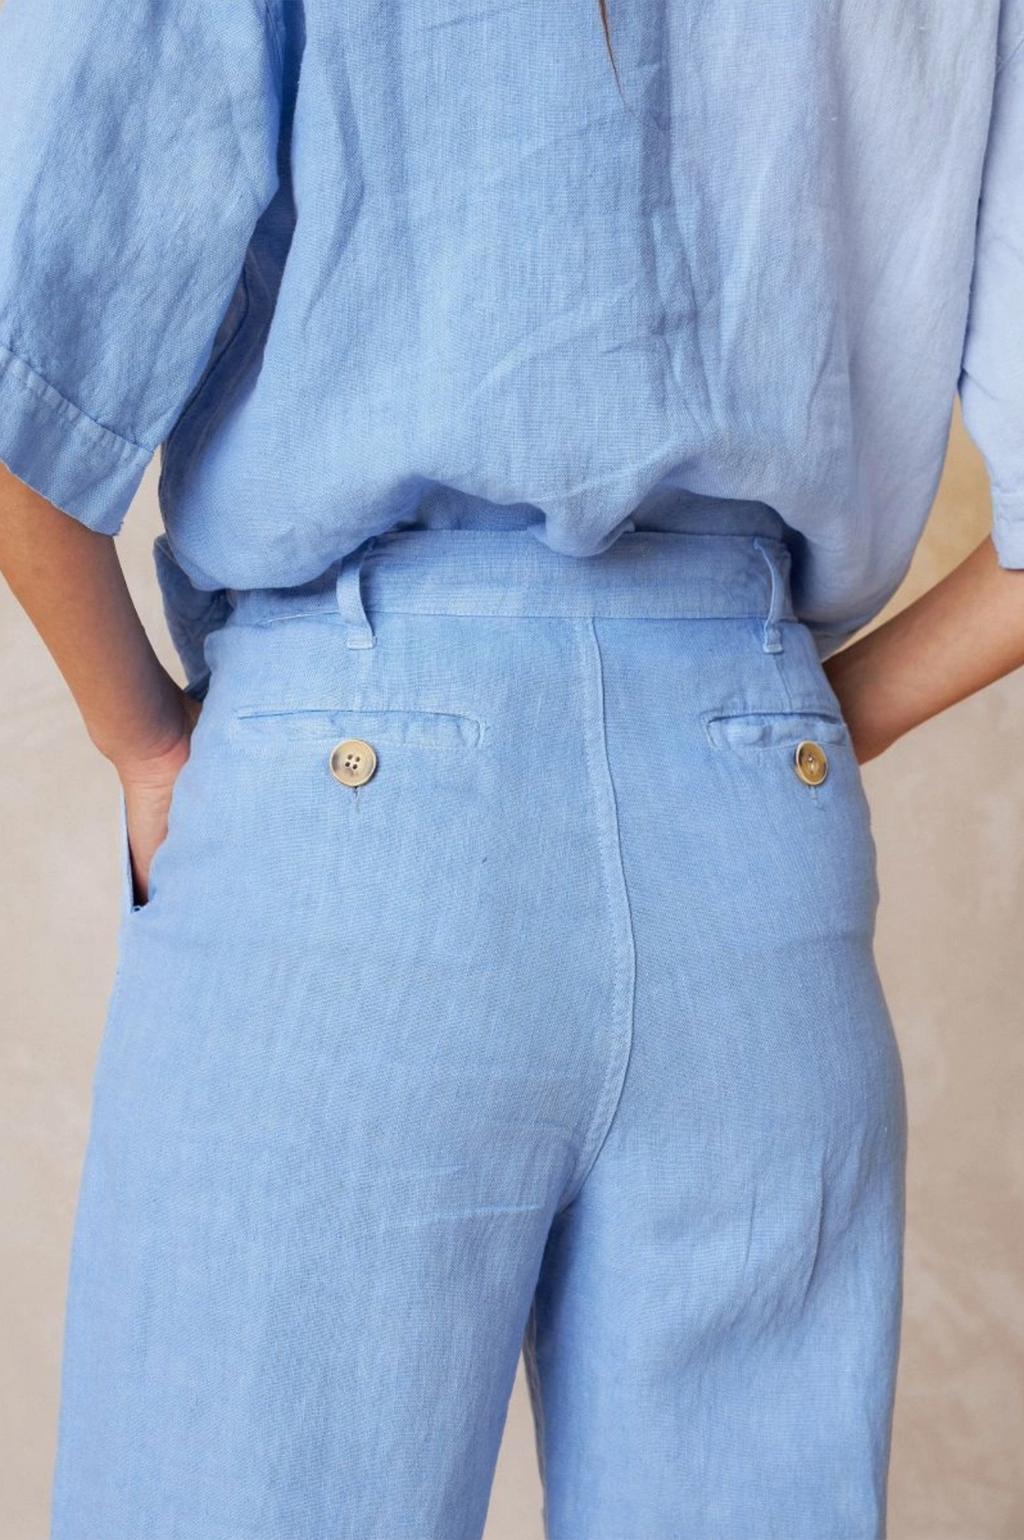 Indi & Cold Glacial Blue Trousers - The Mercantile London